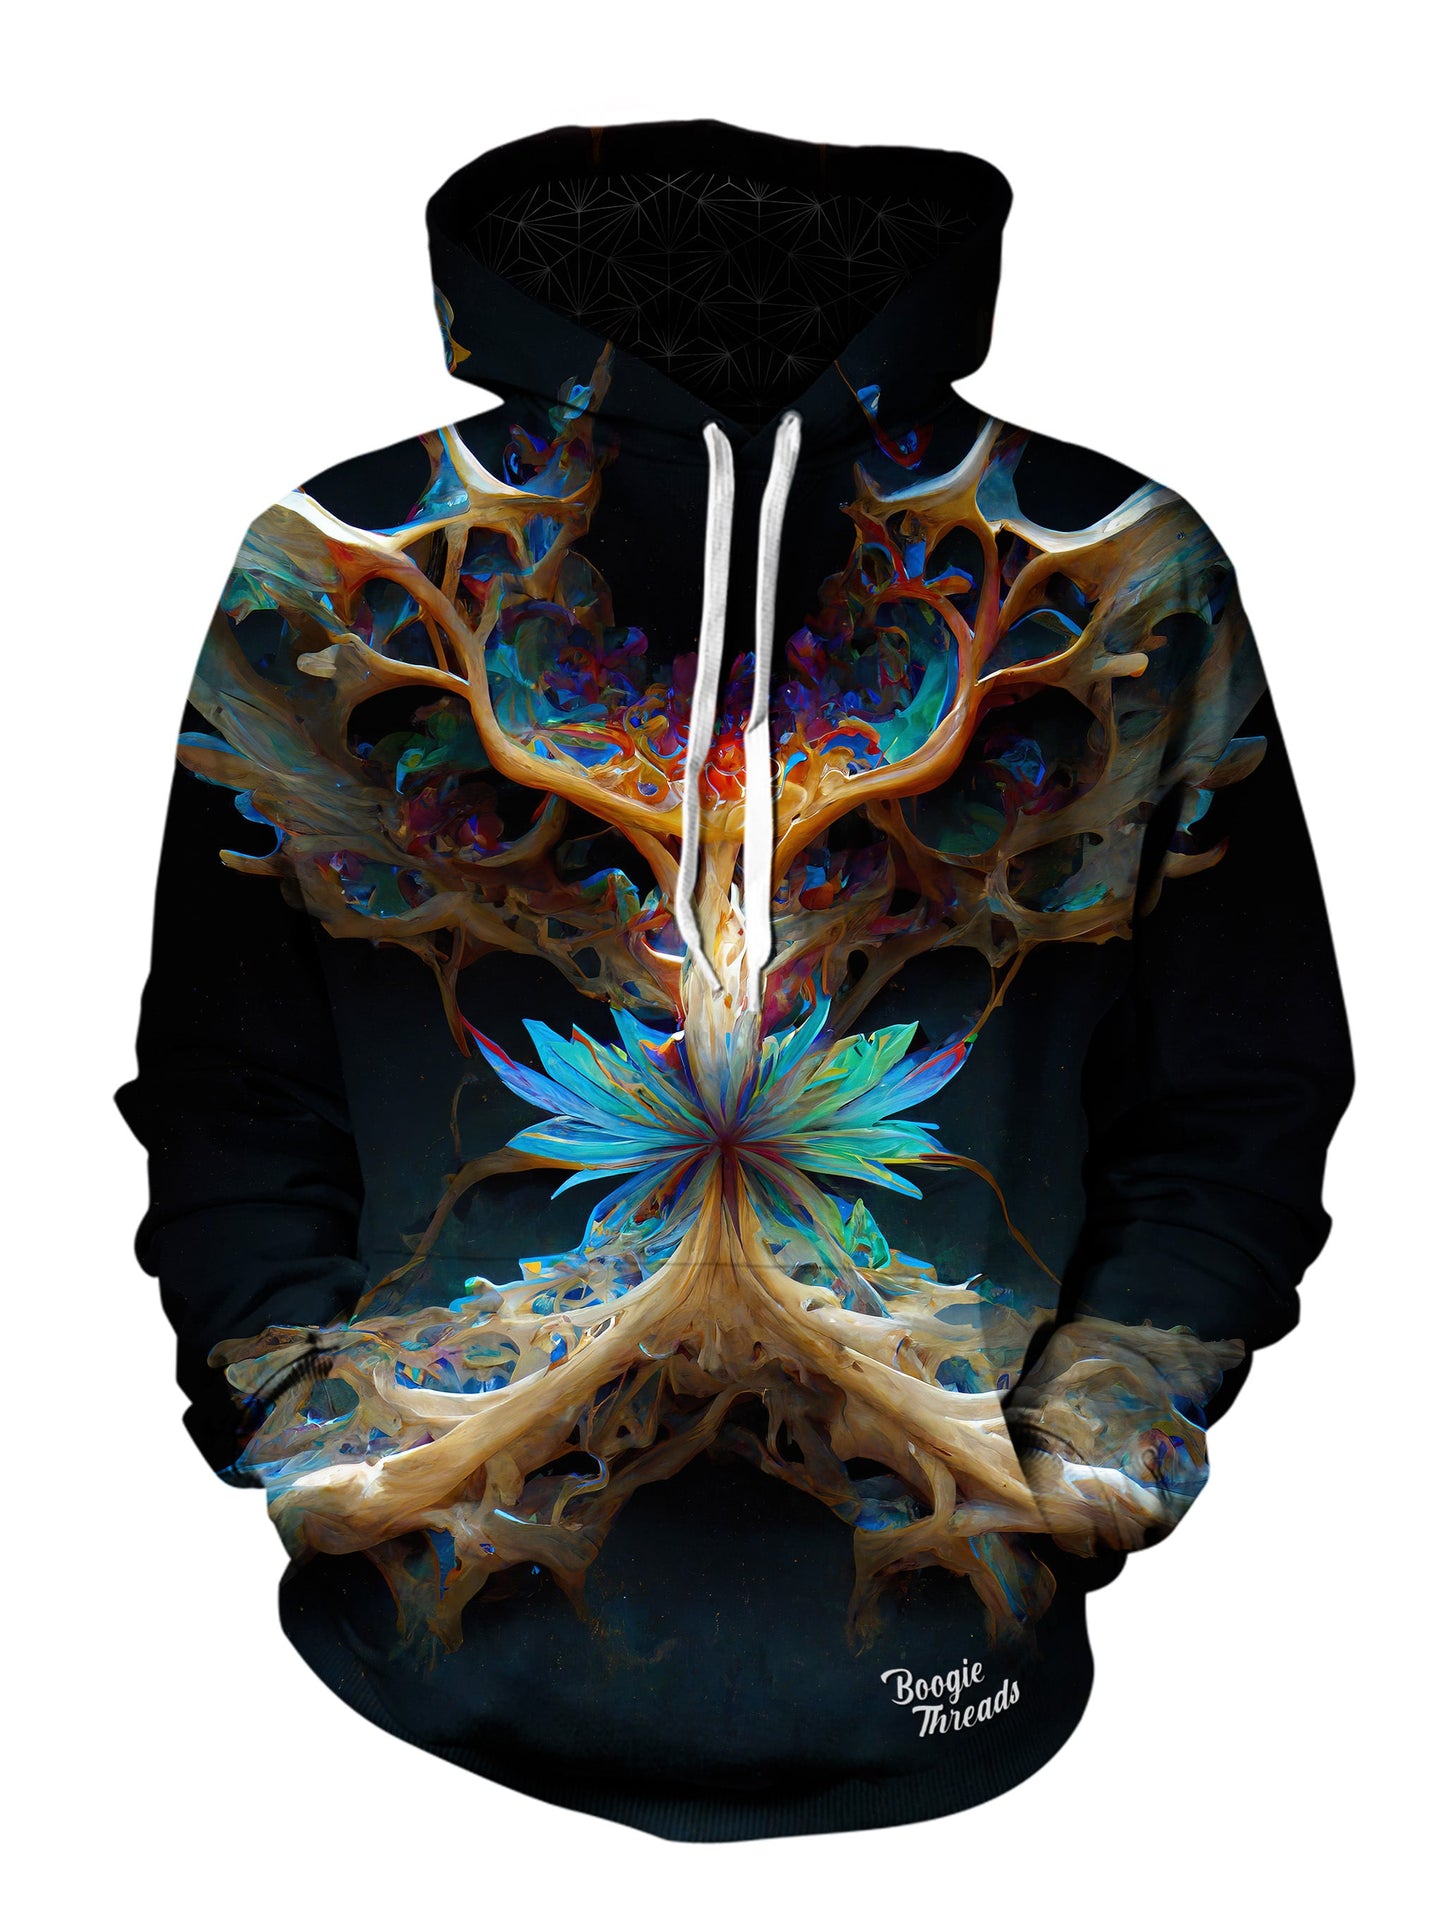 Carefree Luxury Unisex Pullover Hoodie - EDM Festival Clothing - Boogie Threads